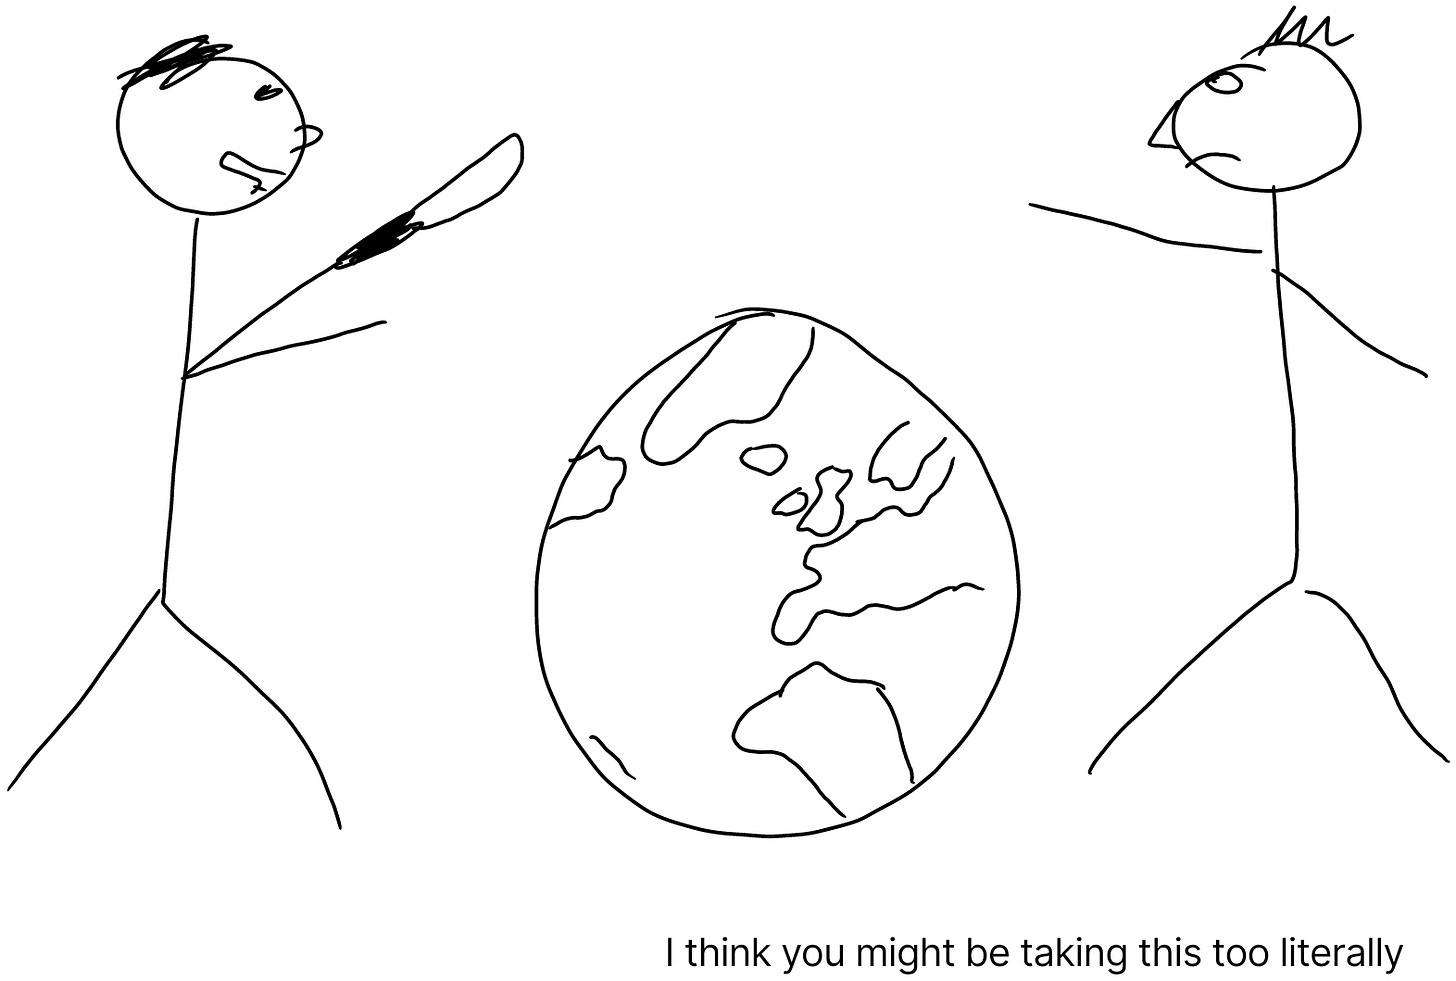 A stick figure attempts to chop up a globe, while the other says "I think you might be taking this too literally."